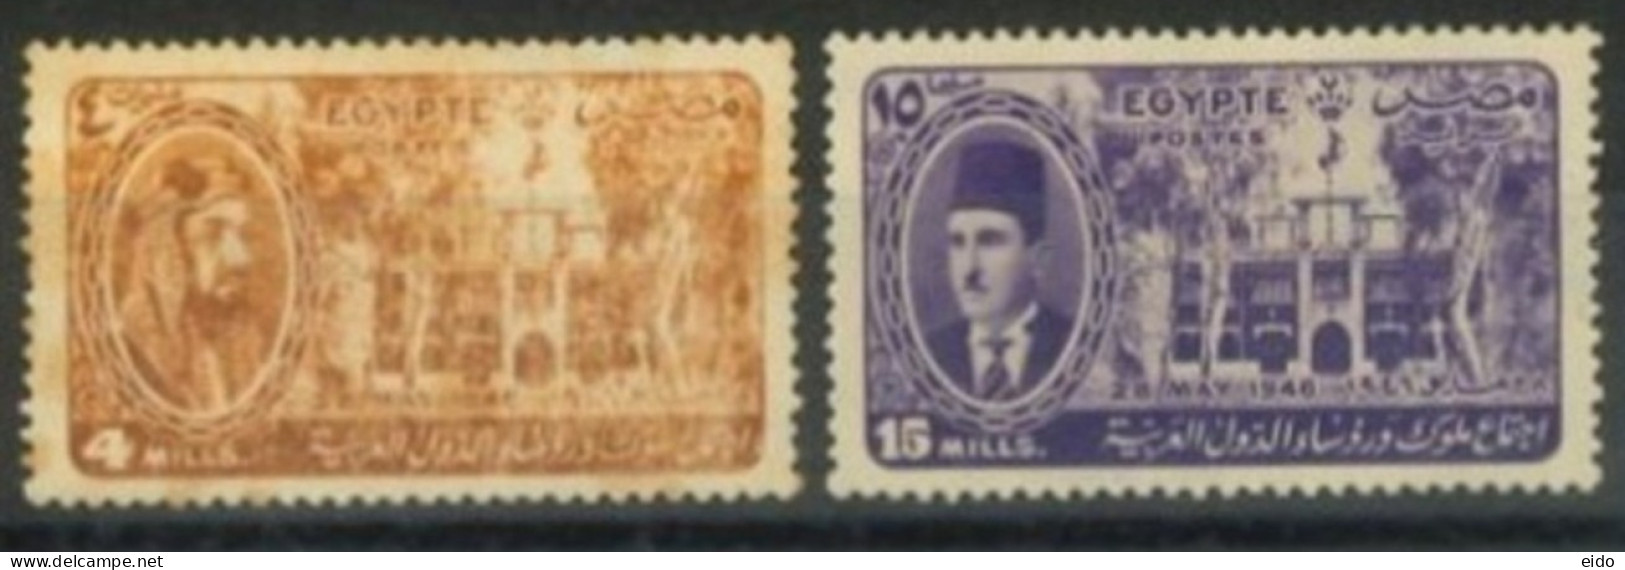 EGYPT - 1946 - ARAB LEAGUE CONGRESS, CAIRO STAMPS SET OF 2, SG # 318 & 321, MM(*). - Used Stamps